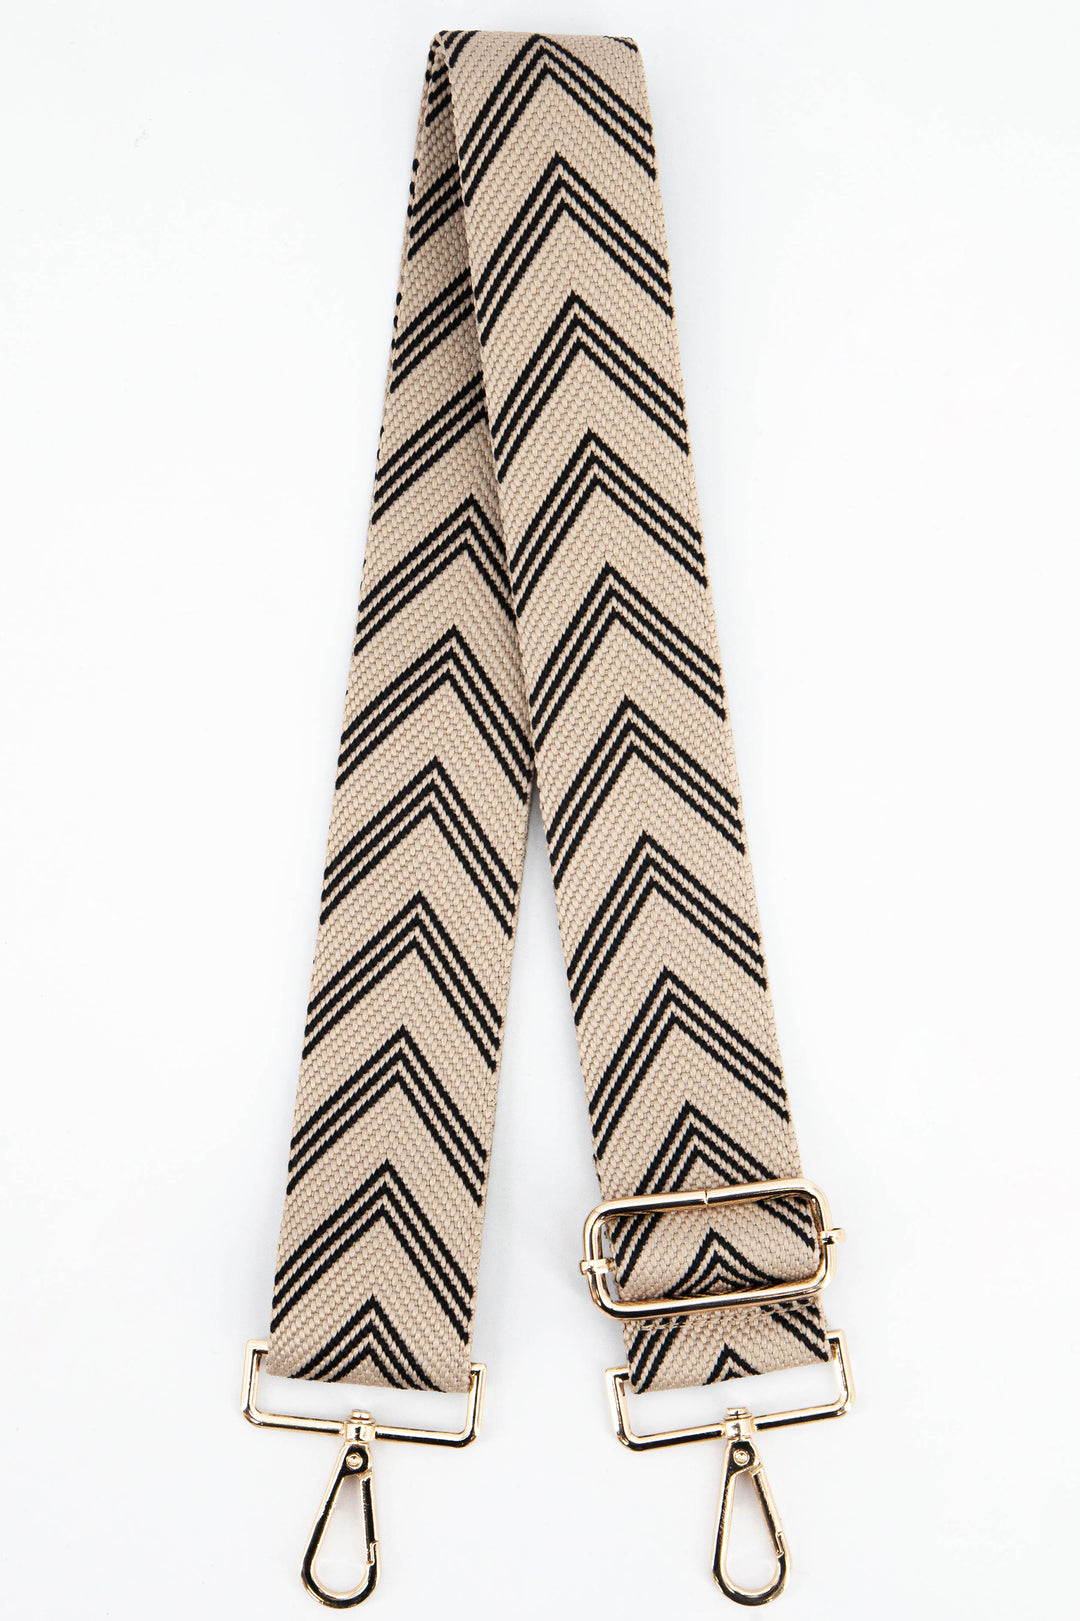 black and beige woven chevron pattern adjustable bag strap with gold snap hook attachments